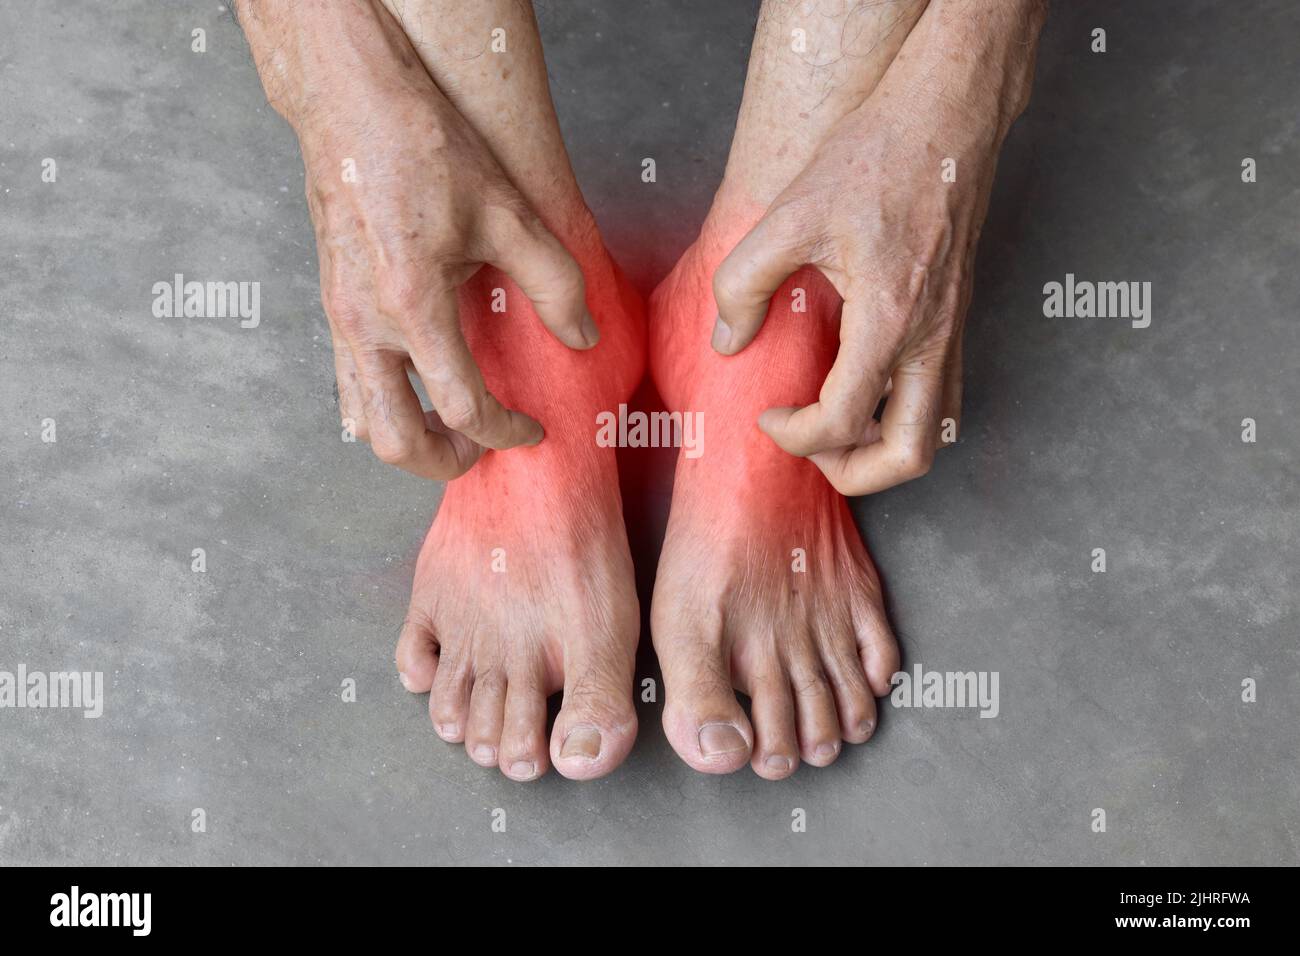 Asian elder man scratching his foot. Concept of itchy skin diseases such as scabies, fungal infection, eczema, psoriasis, allergy, etc. Stock Photo